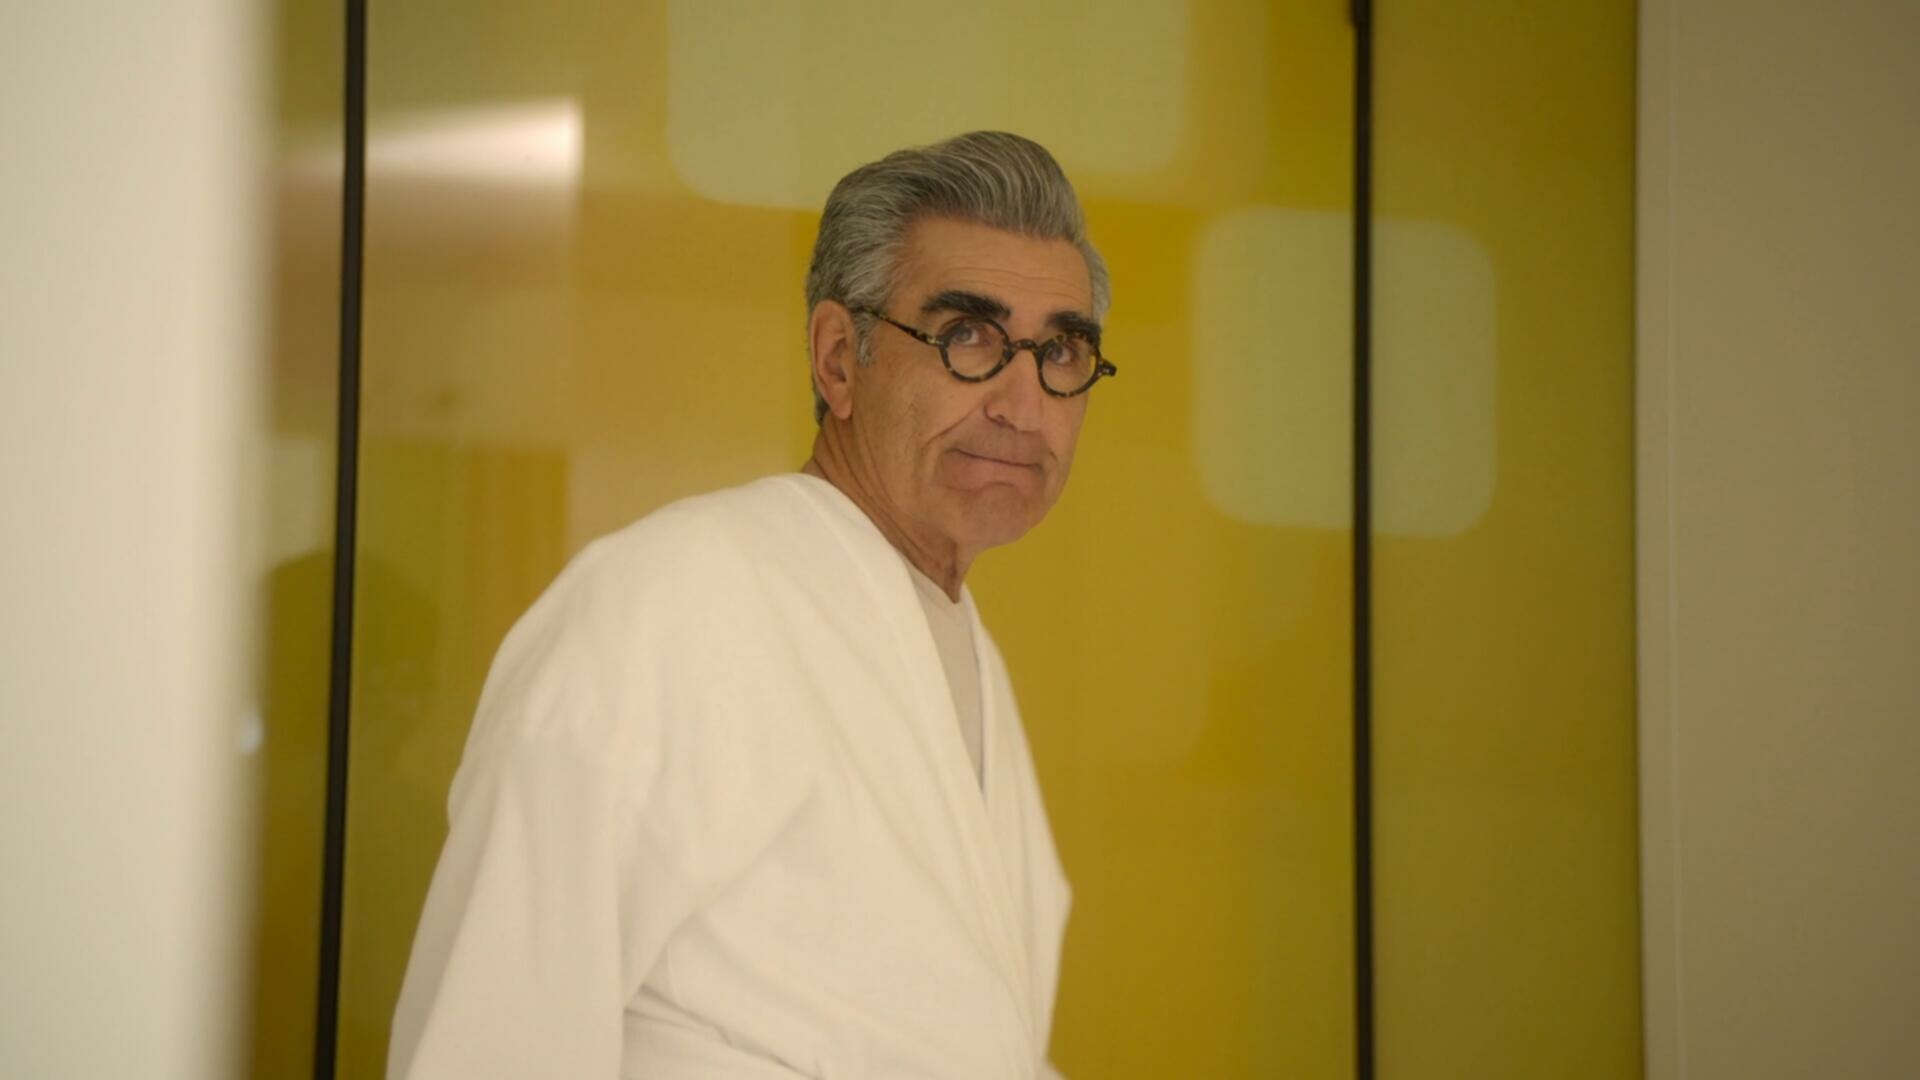 The Reluctant Traveler with Eugene Levy S02E04 Germany the Health Resort 1080p ATVp WEB DL DDP5 1 H